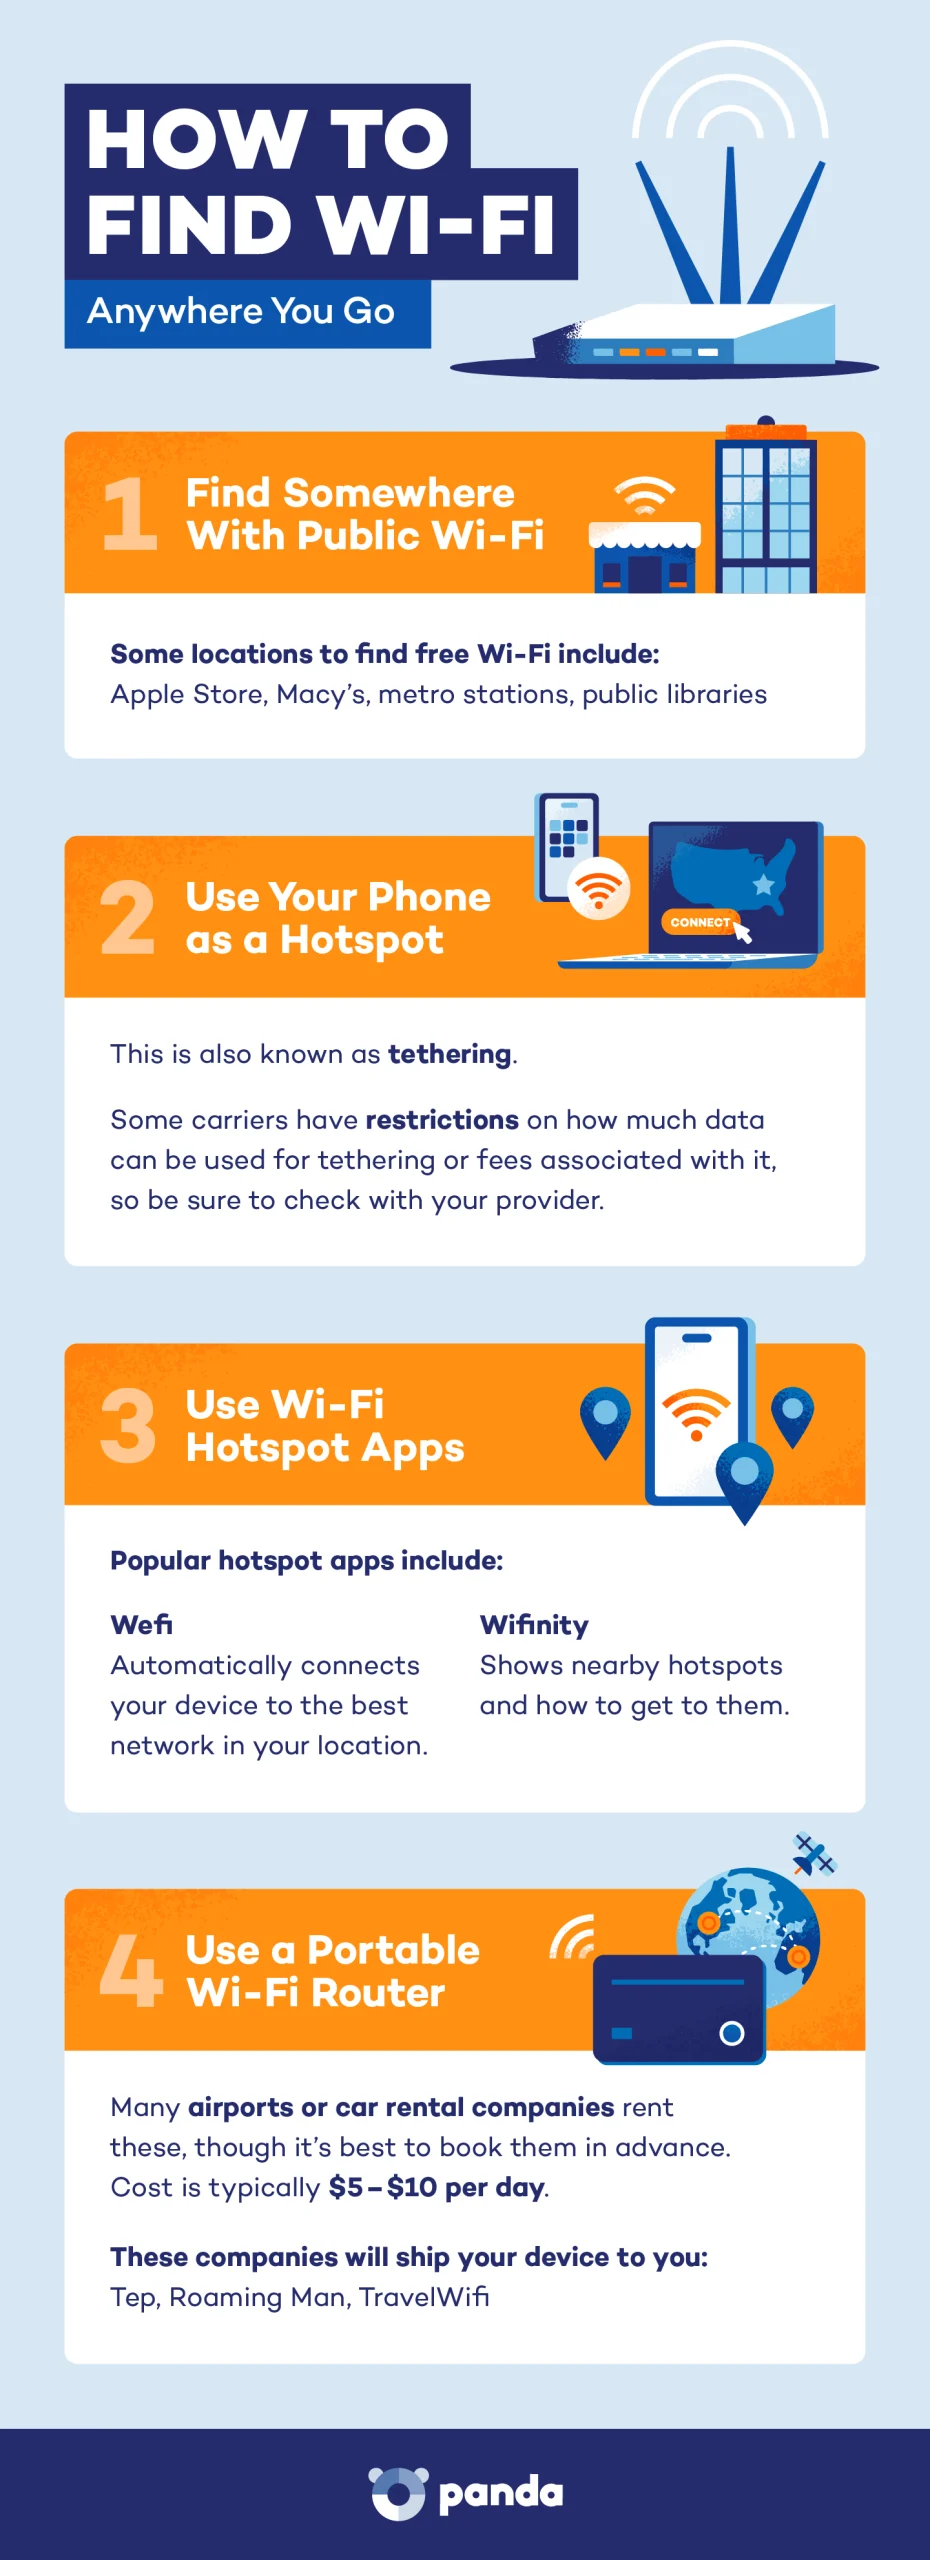 list of ways to find Wi-Fi wherever you go